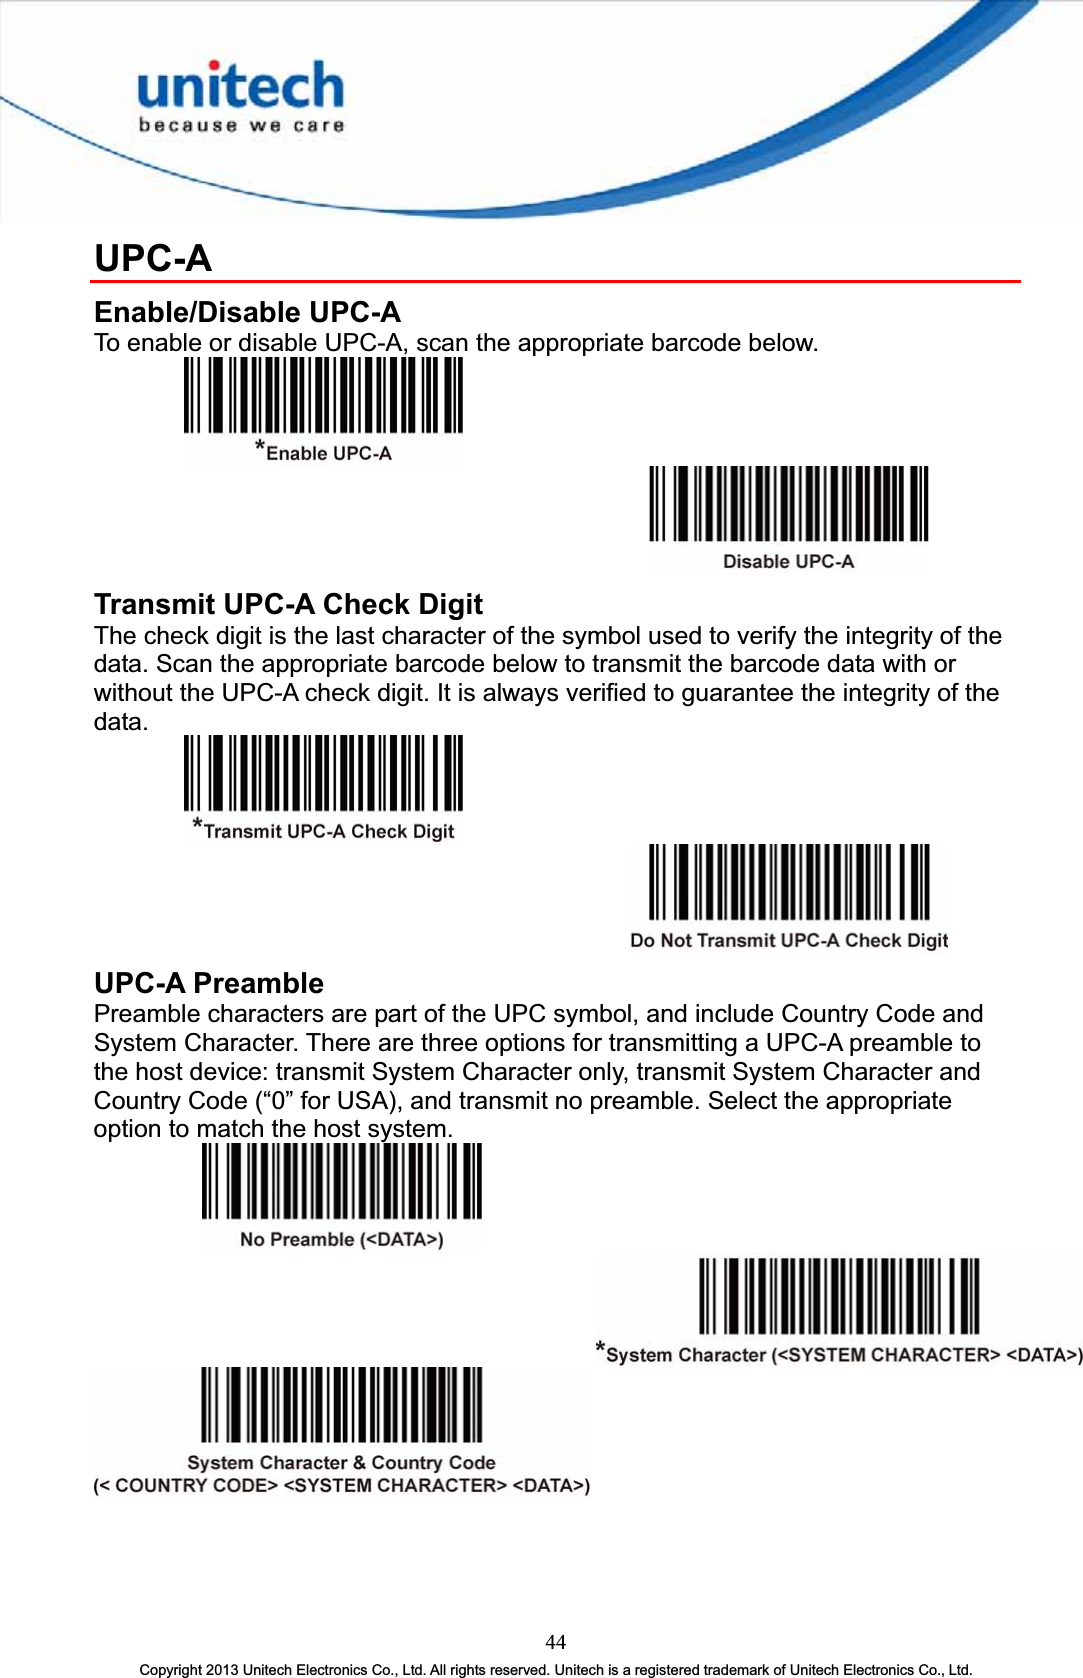 UPC-AEnable/Disable UPC-A To enable or disable UPC-A, scan the appropriate barcode below. Transmit UPC-A Check Digit The check digit is the last character of the symbol used to verify the integrity of the data. Scan the appropriate barcode below to transmit the barcode data with or without the UPC-A check digit. It is always verified to guarantee the integrity of the data. UPC-A Preamble Preamble characters are part of the UPC symbol, and include Country Code and System Character. There are three options for transmitting a UPC-A preamble to the host device: transmit System Character only, transmit System Character and Country Code (“0” for USA), and transmit no preamble. Select the appropriate option to match the host system. 44Copyright 2013 Unitech Electronics Co., Ltd. All rights reserved. Unitech is a registered trademark of Unitech Electronics Co., Ltd. 